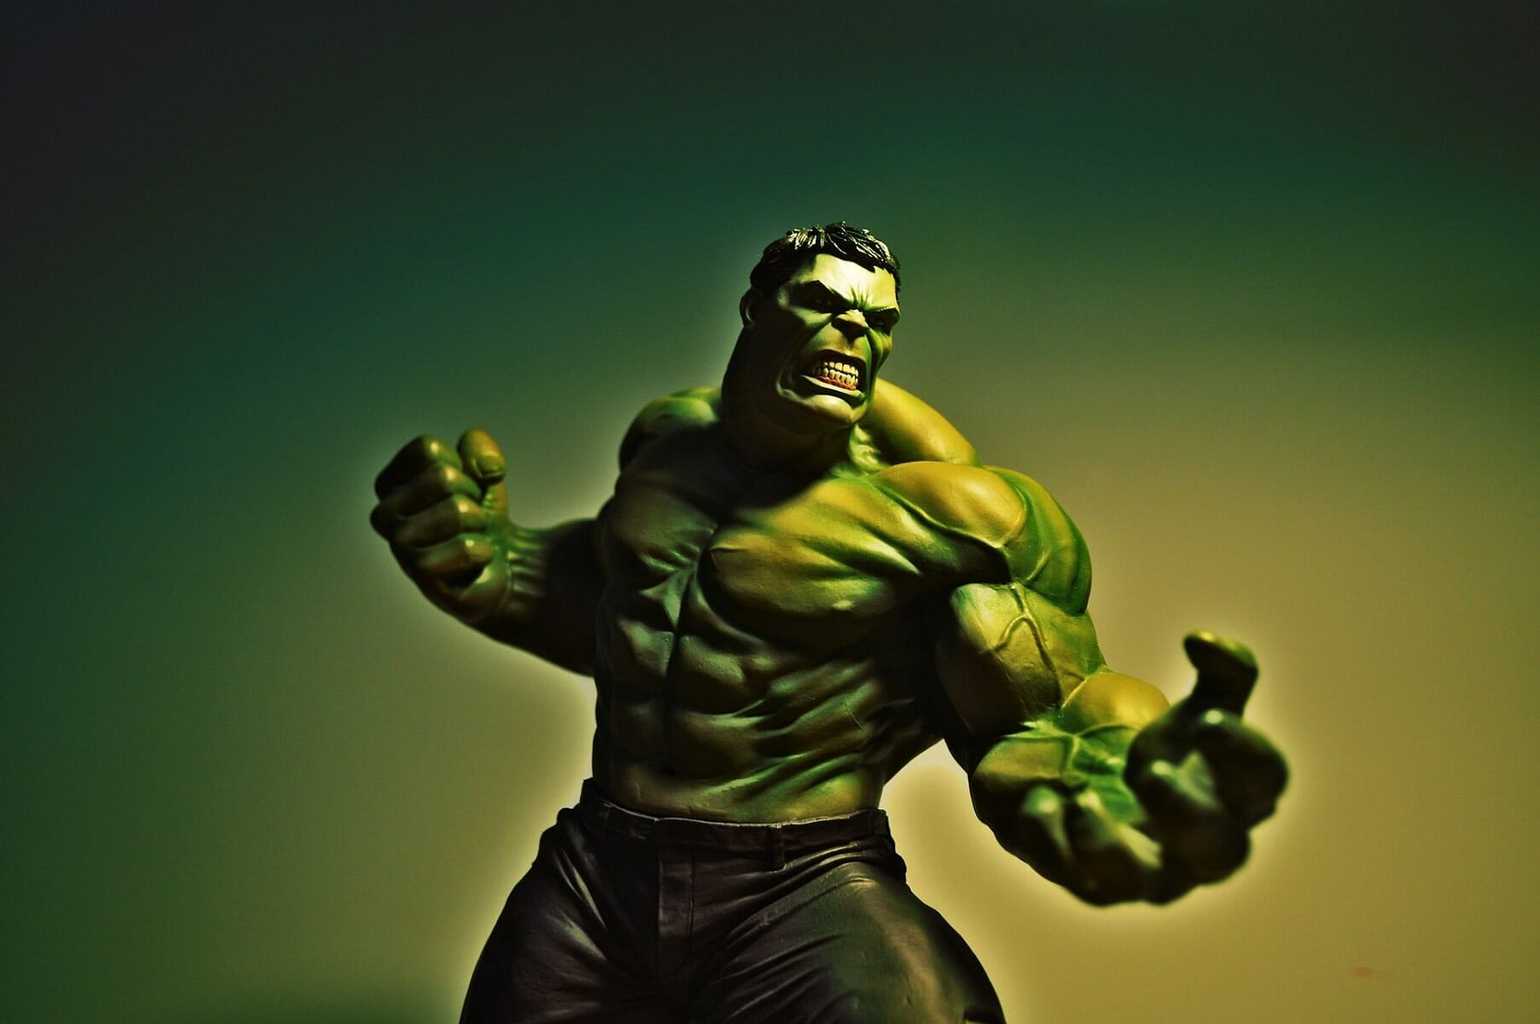 Marvel's Hulk being really angry